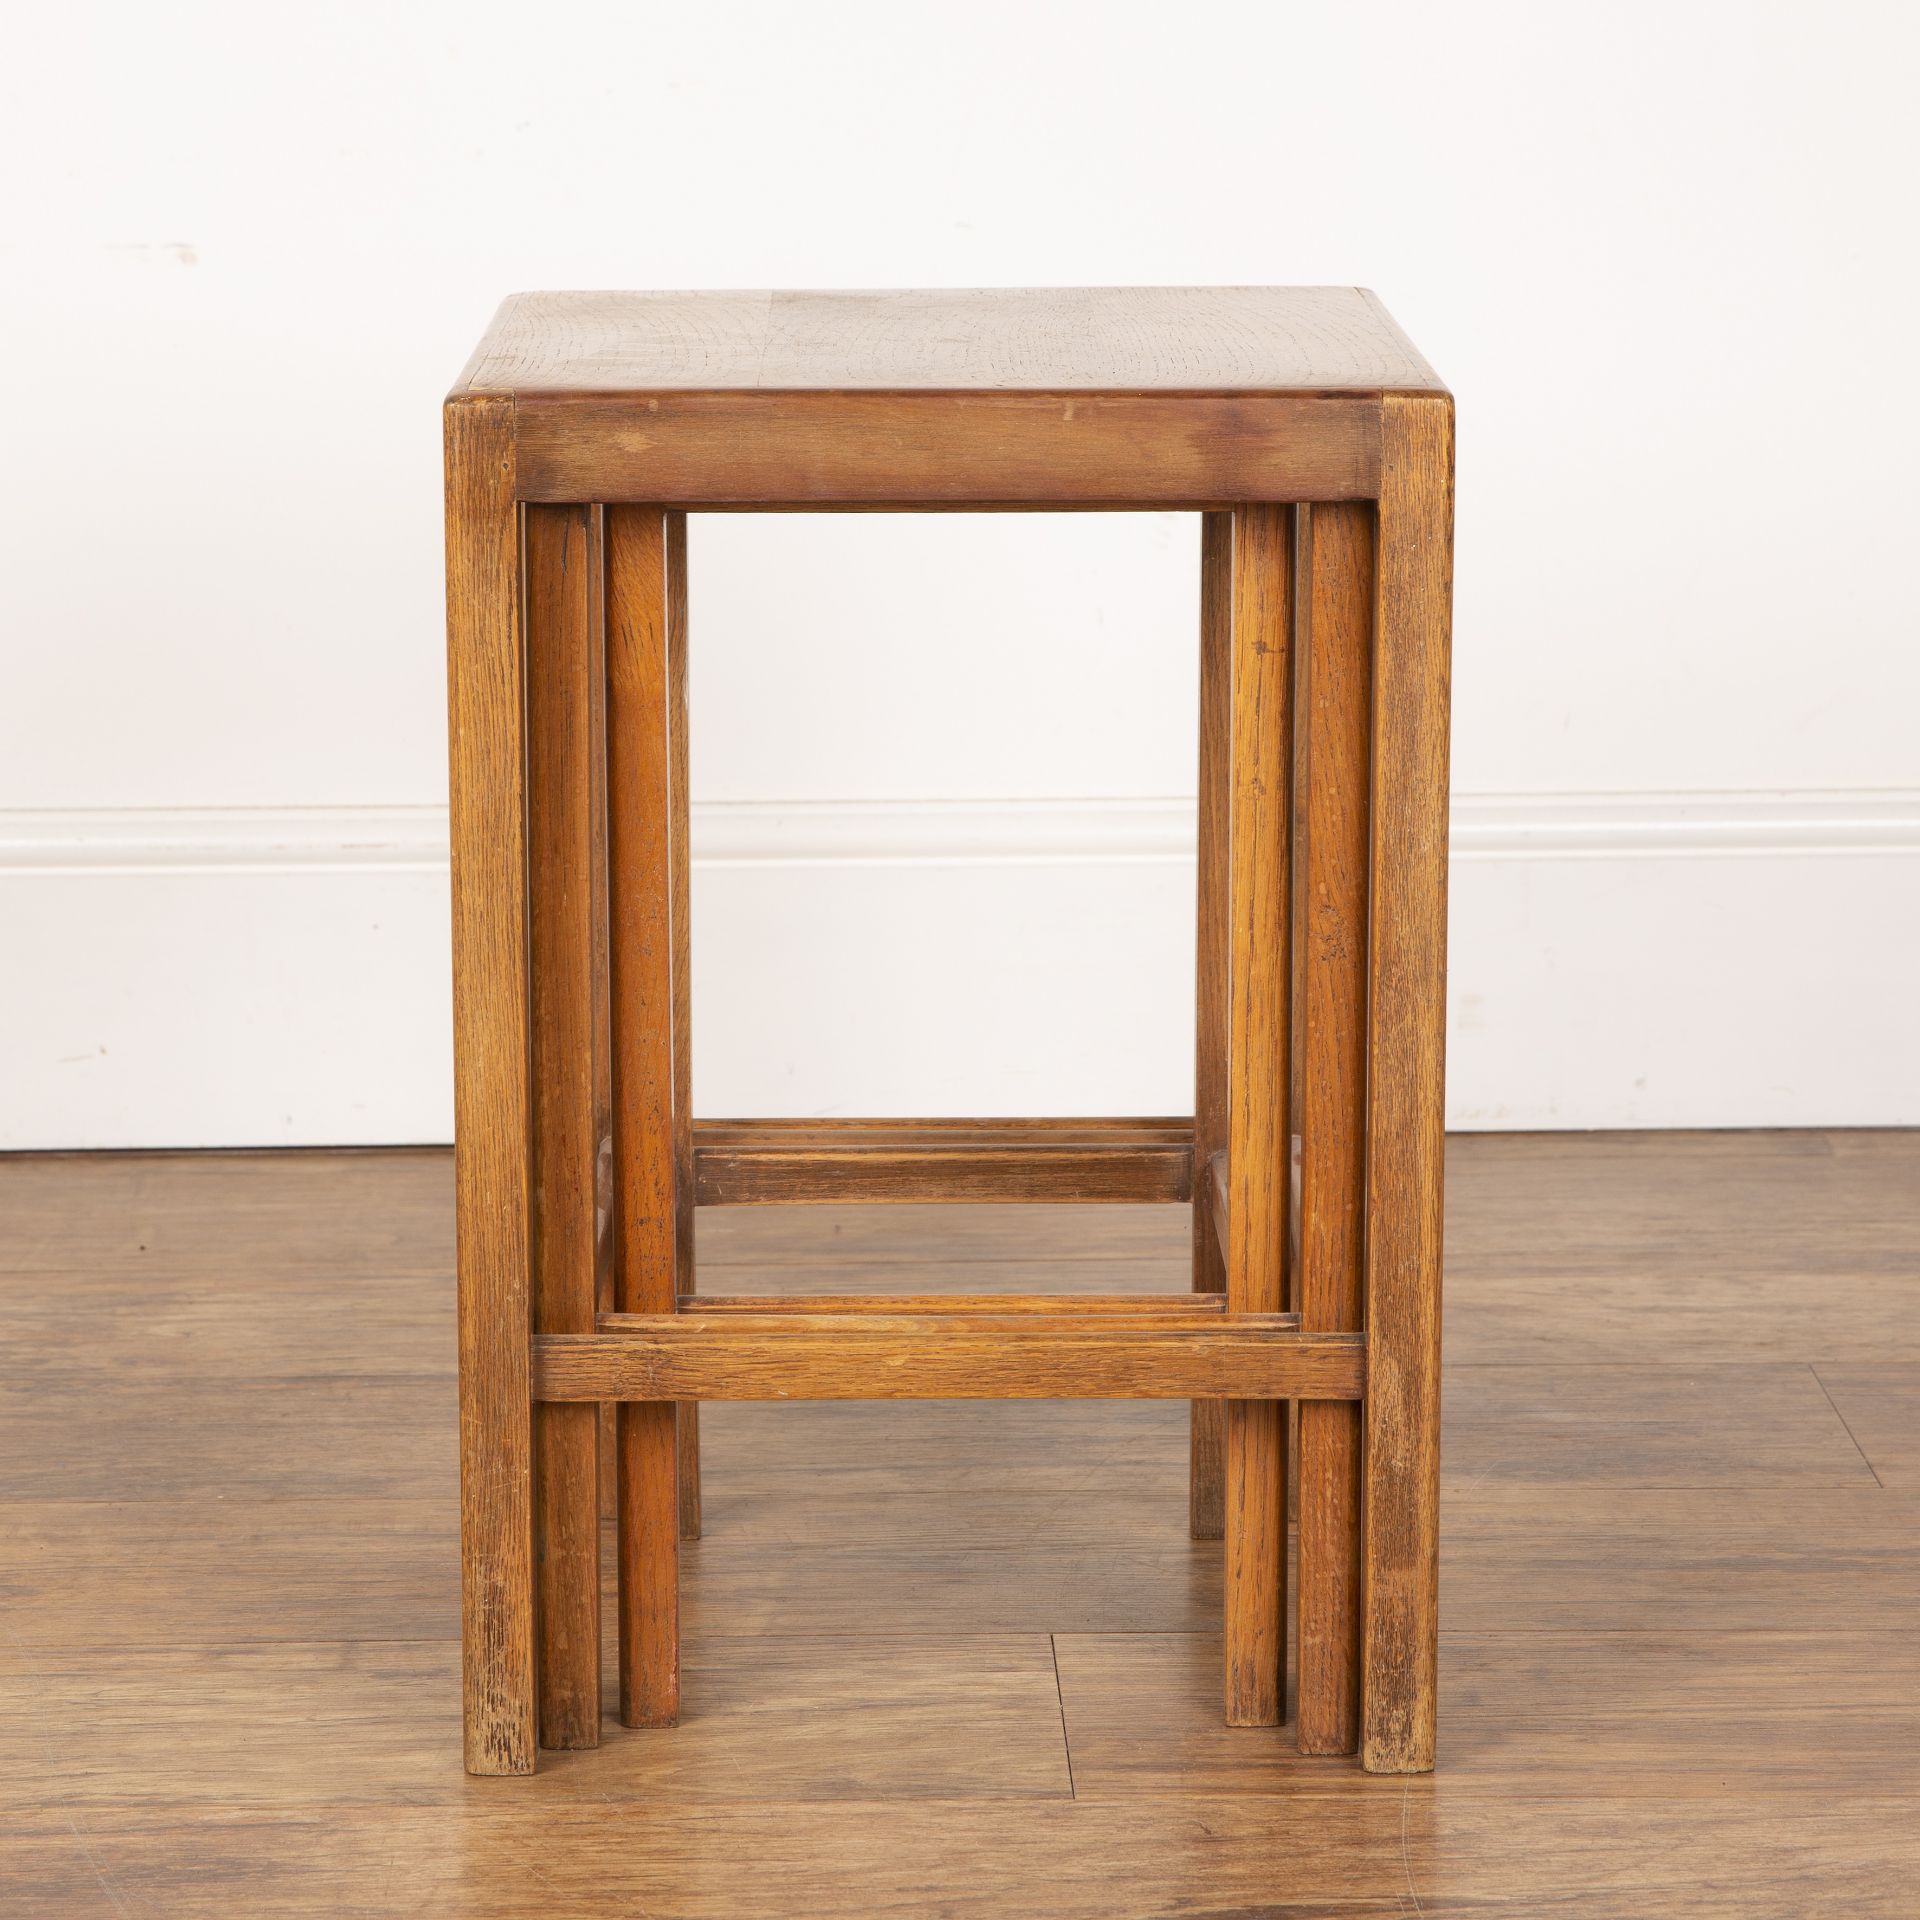 Heals style oak, nest of three tables, with square tops, the largest table measures 34cm wide x 49cm - Image 4 of 6